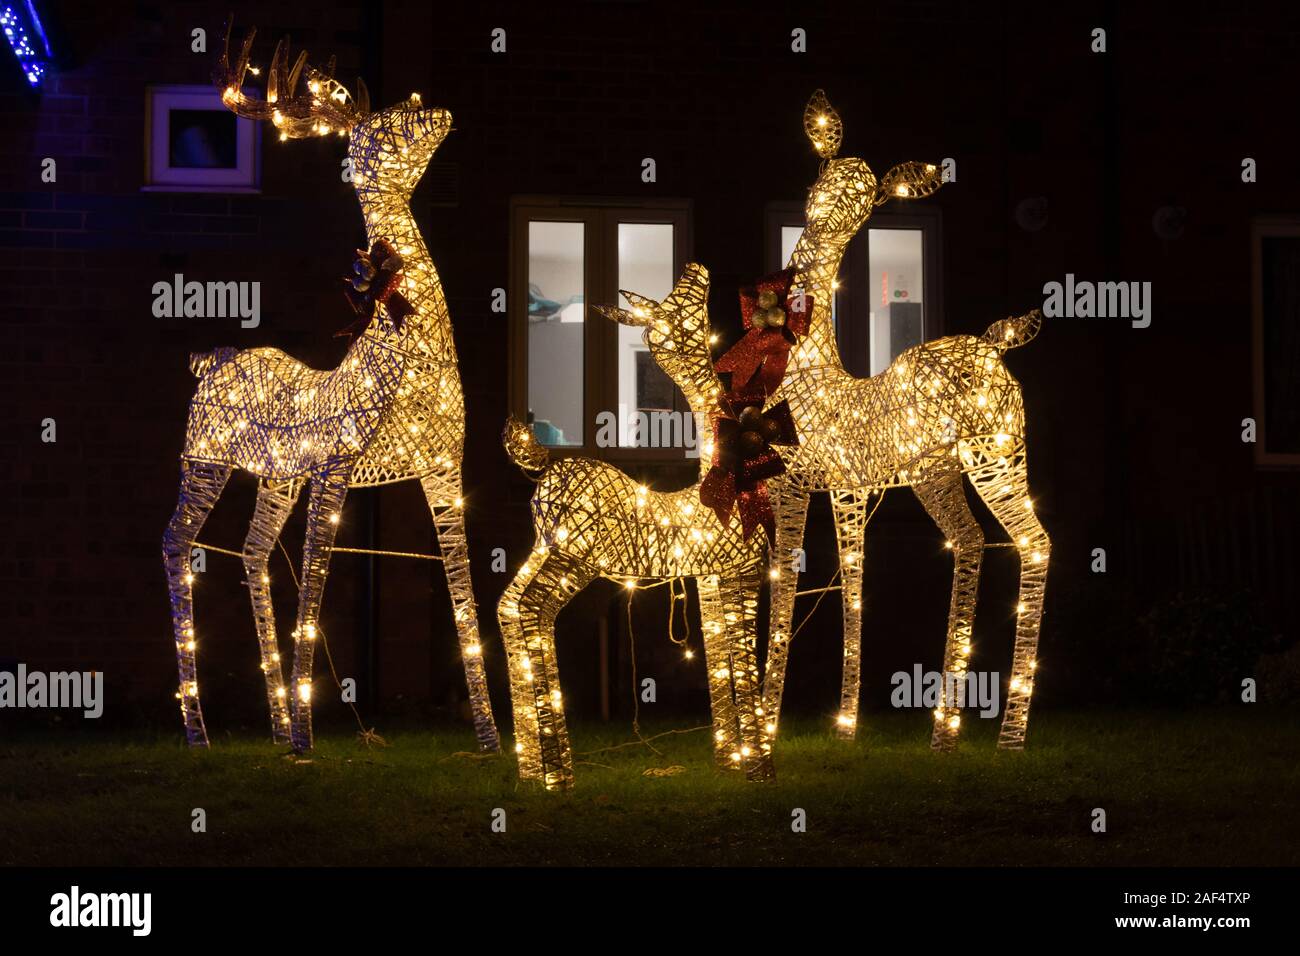 Large wicker reindeer ornaments with Christmas lights lit up in a front garden, UK Stock Photo